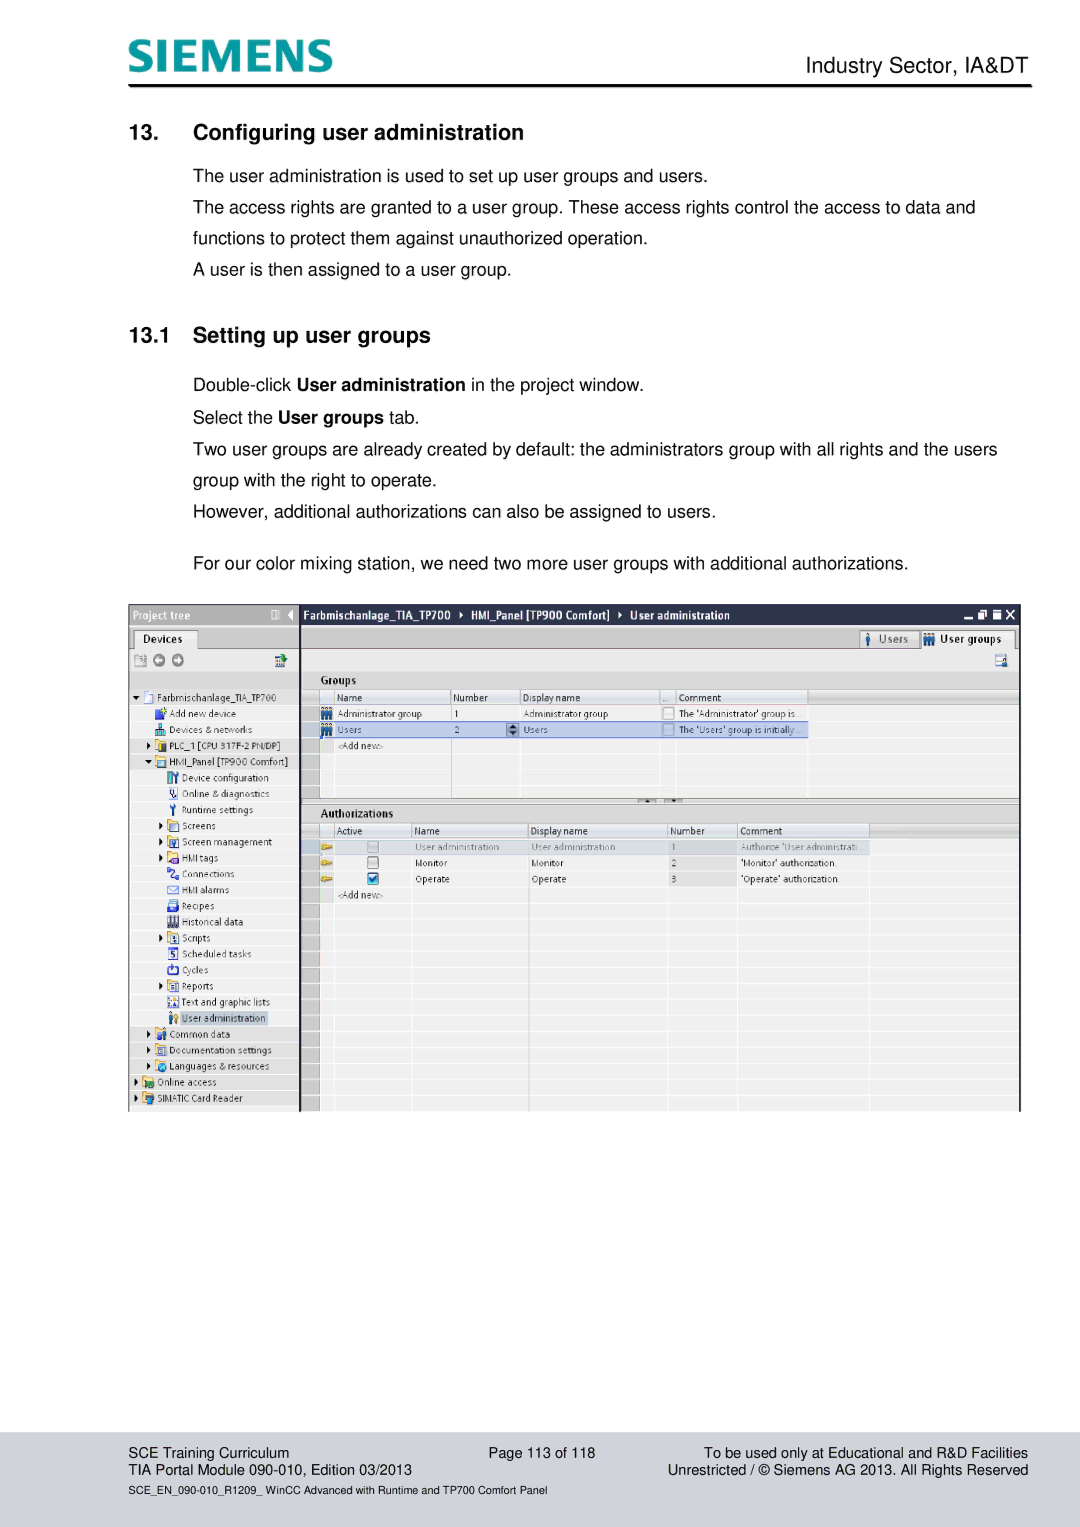 Siemens 090-010 manual Configuring user administration, Setting up user groups 